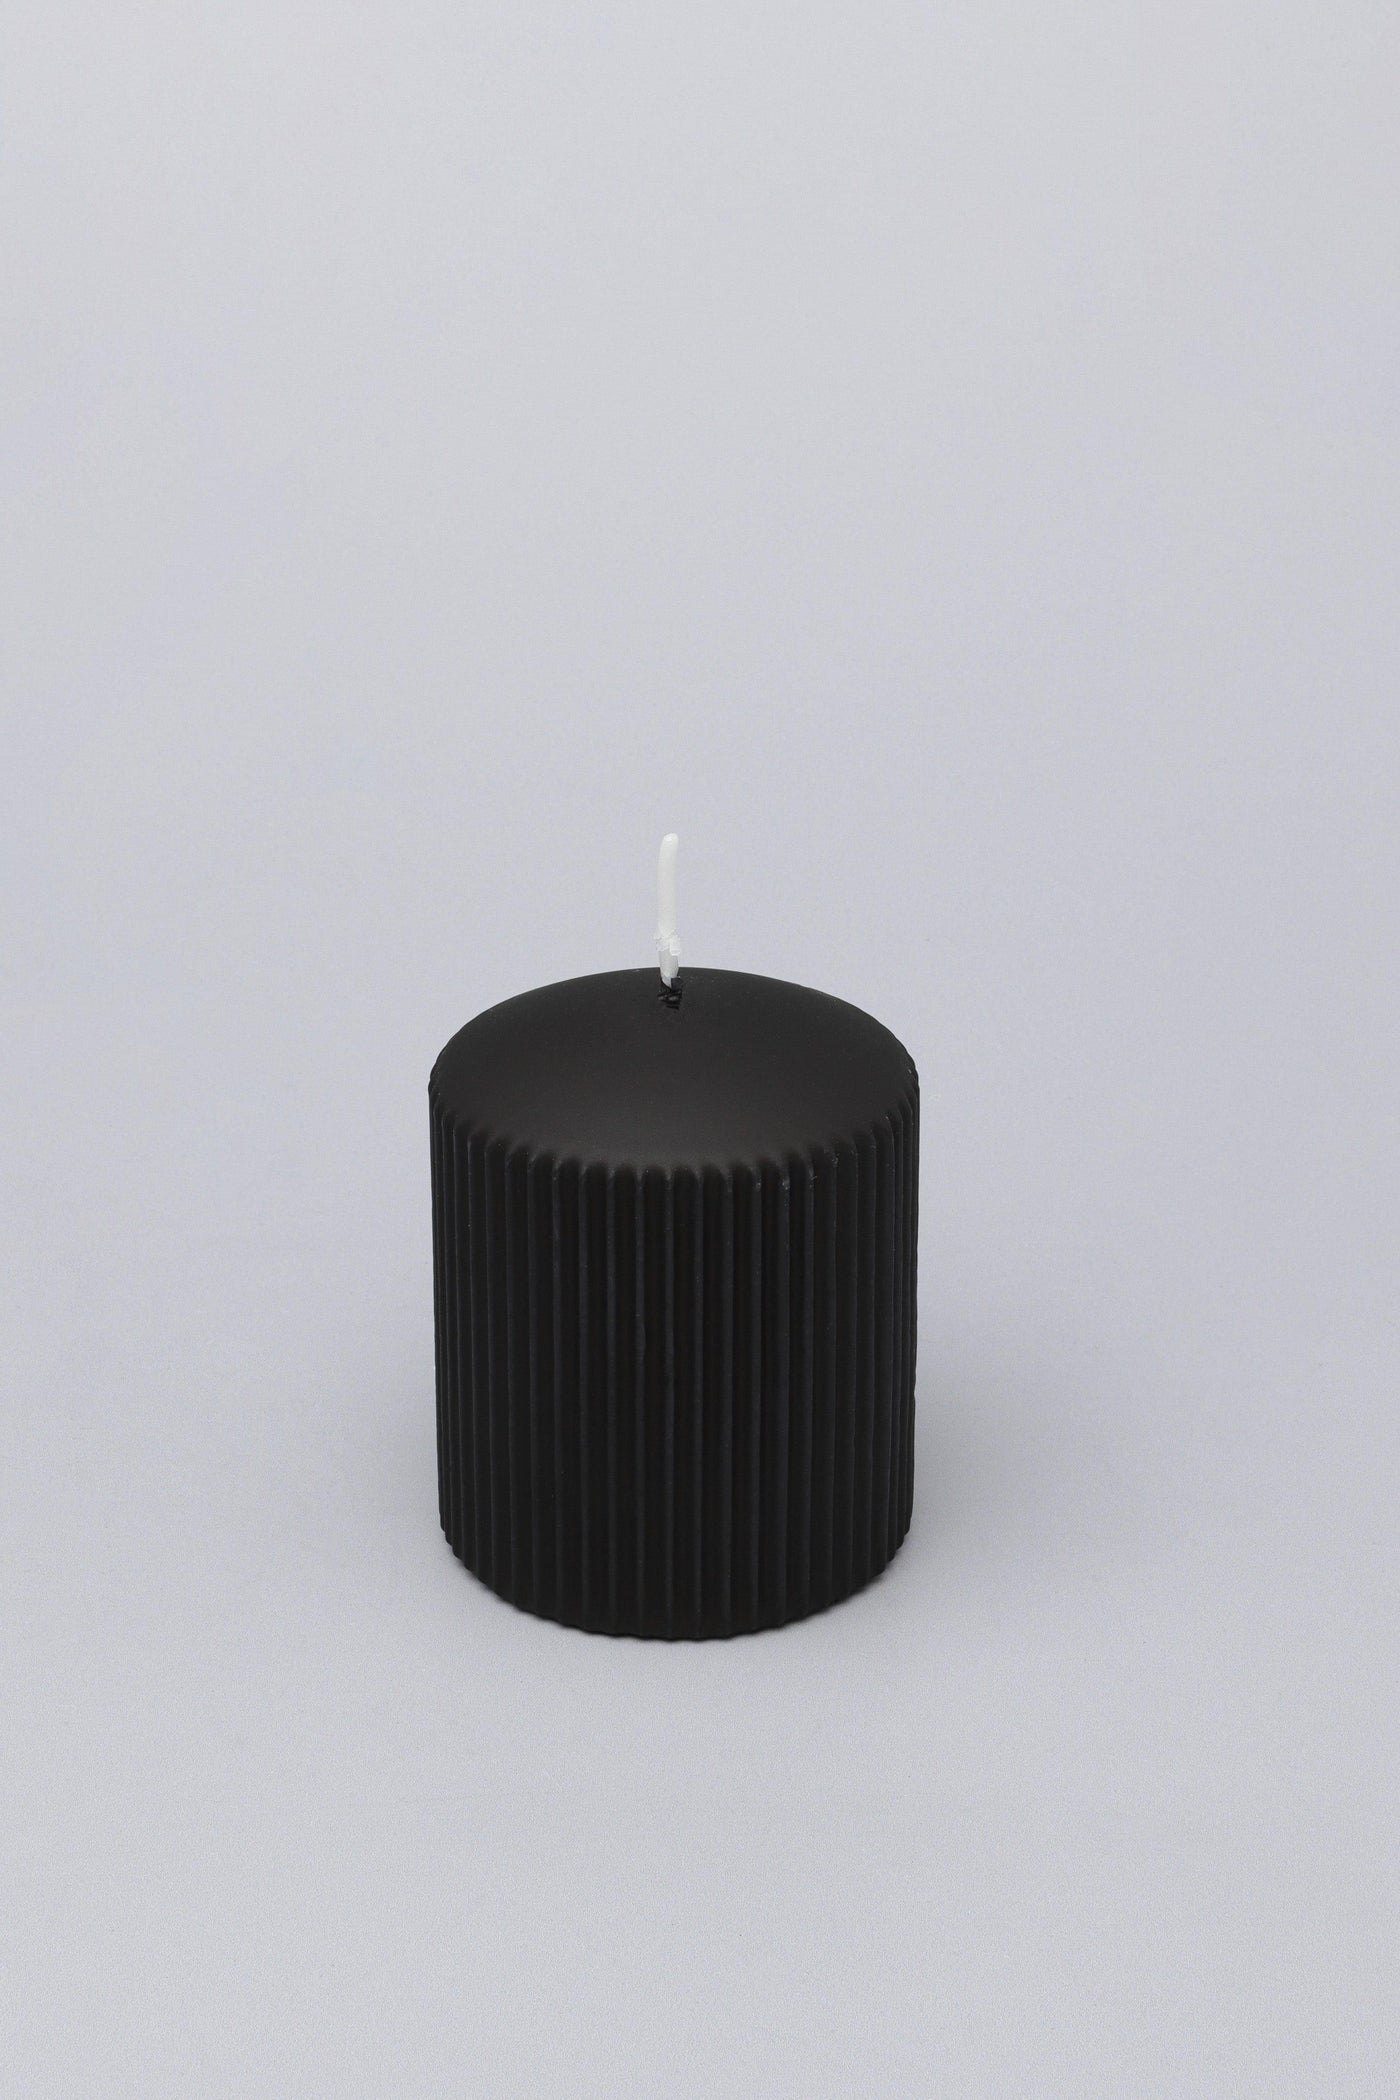 Gdecorstore Candles Black / Small Ribbed Textured Jade Black Gothic Vintage Pillar Candle